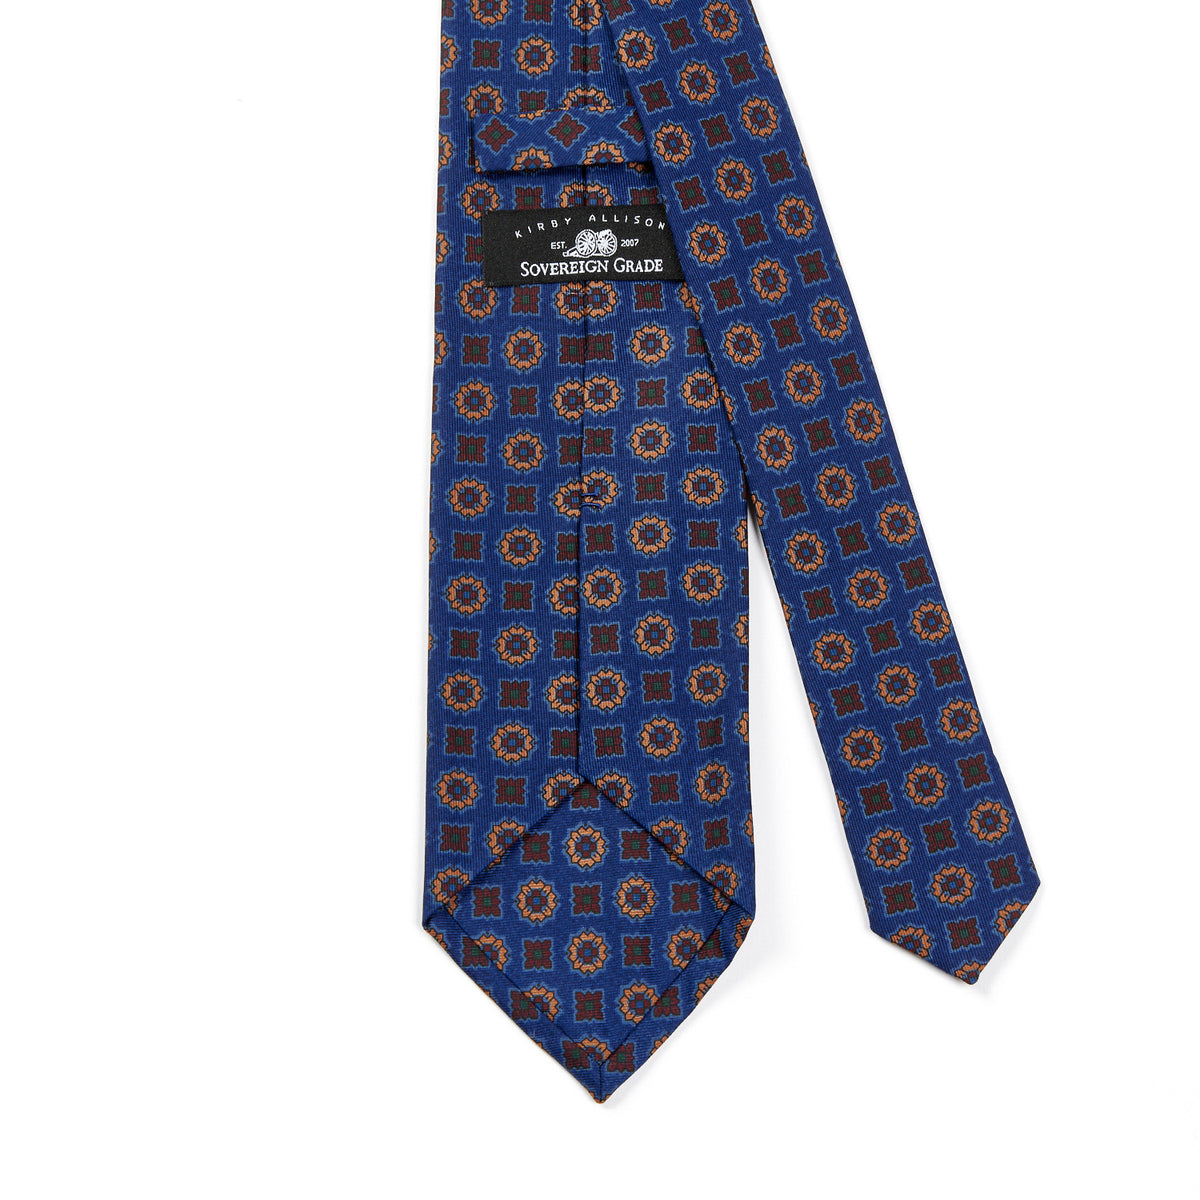 A high-quality, handmade Sovereign Grade Blue Floral Diamond Ancient Madder Tie by KirbyAllison.com, with a blue and brown pattern.